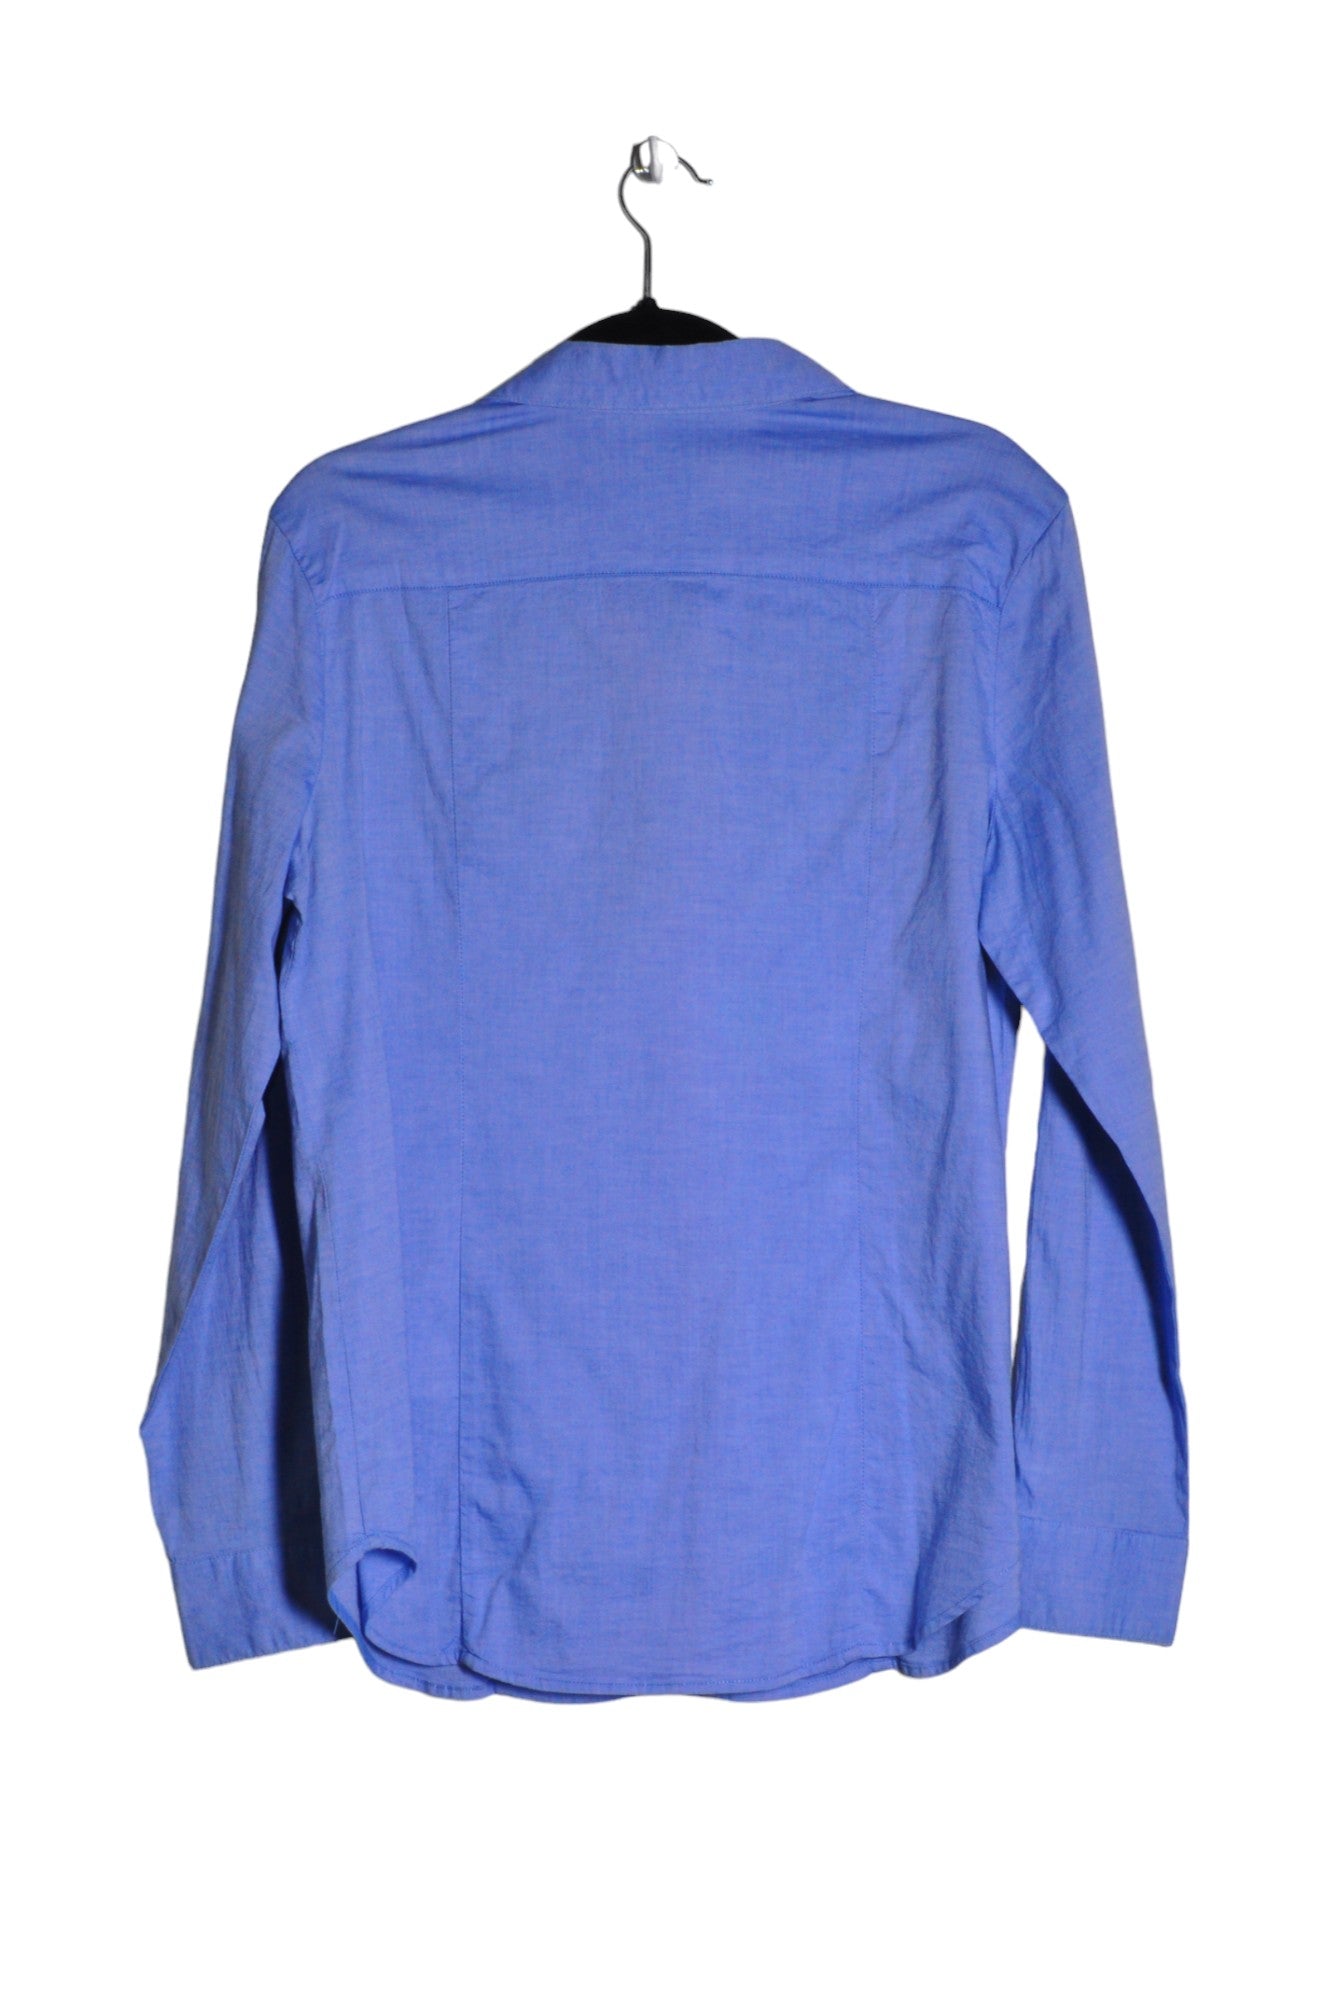 SIGNATURE COLLECTION Women Button Down Tops Regular fit in Blue - Size L | 6.8 $ KOOP